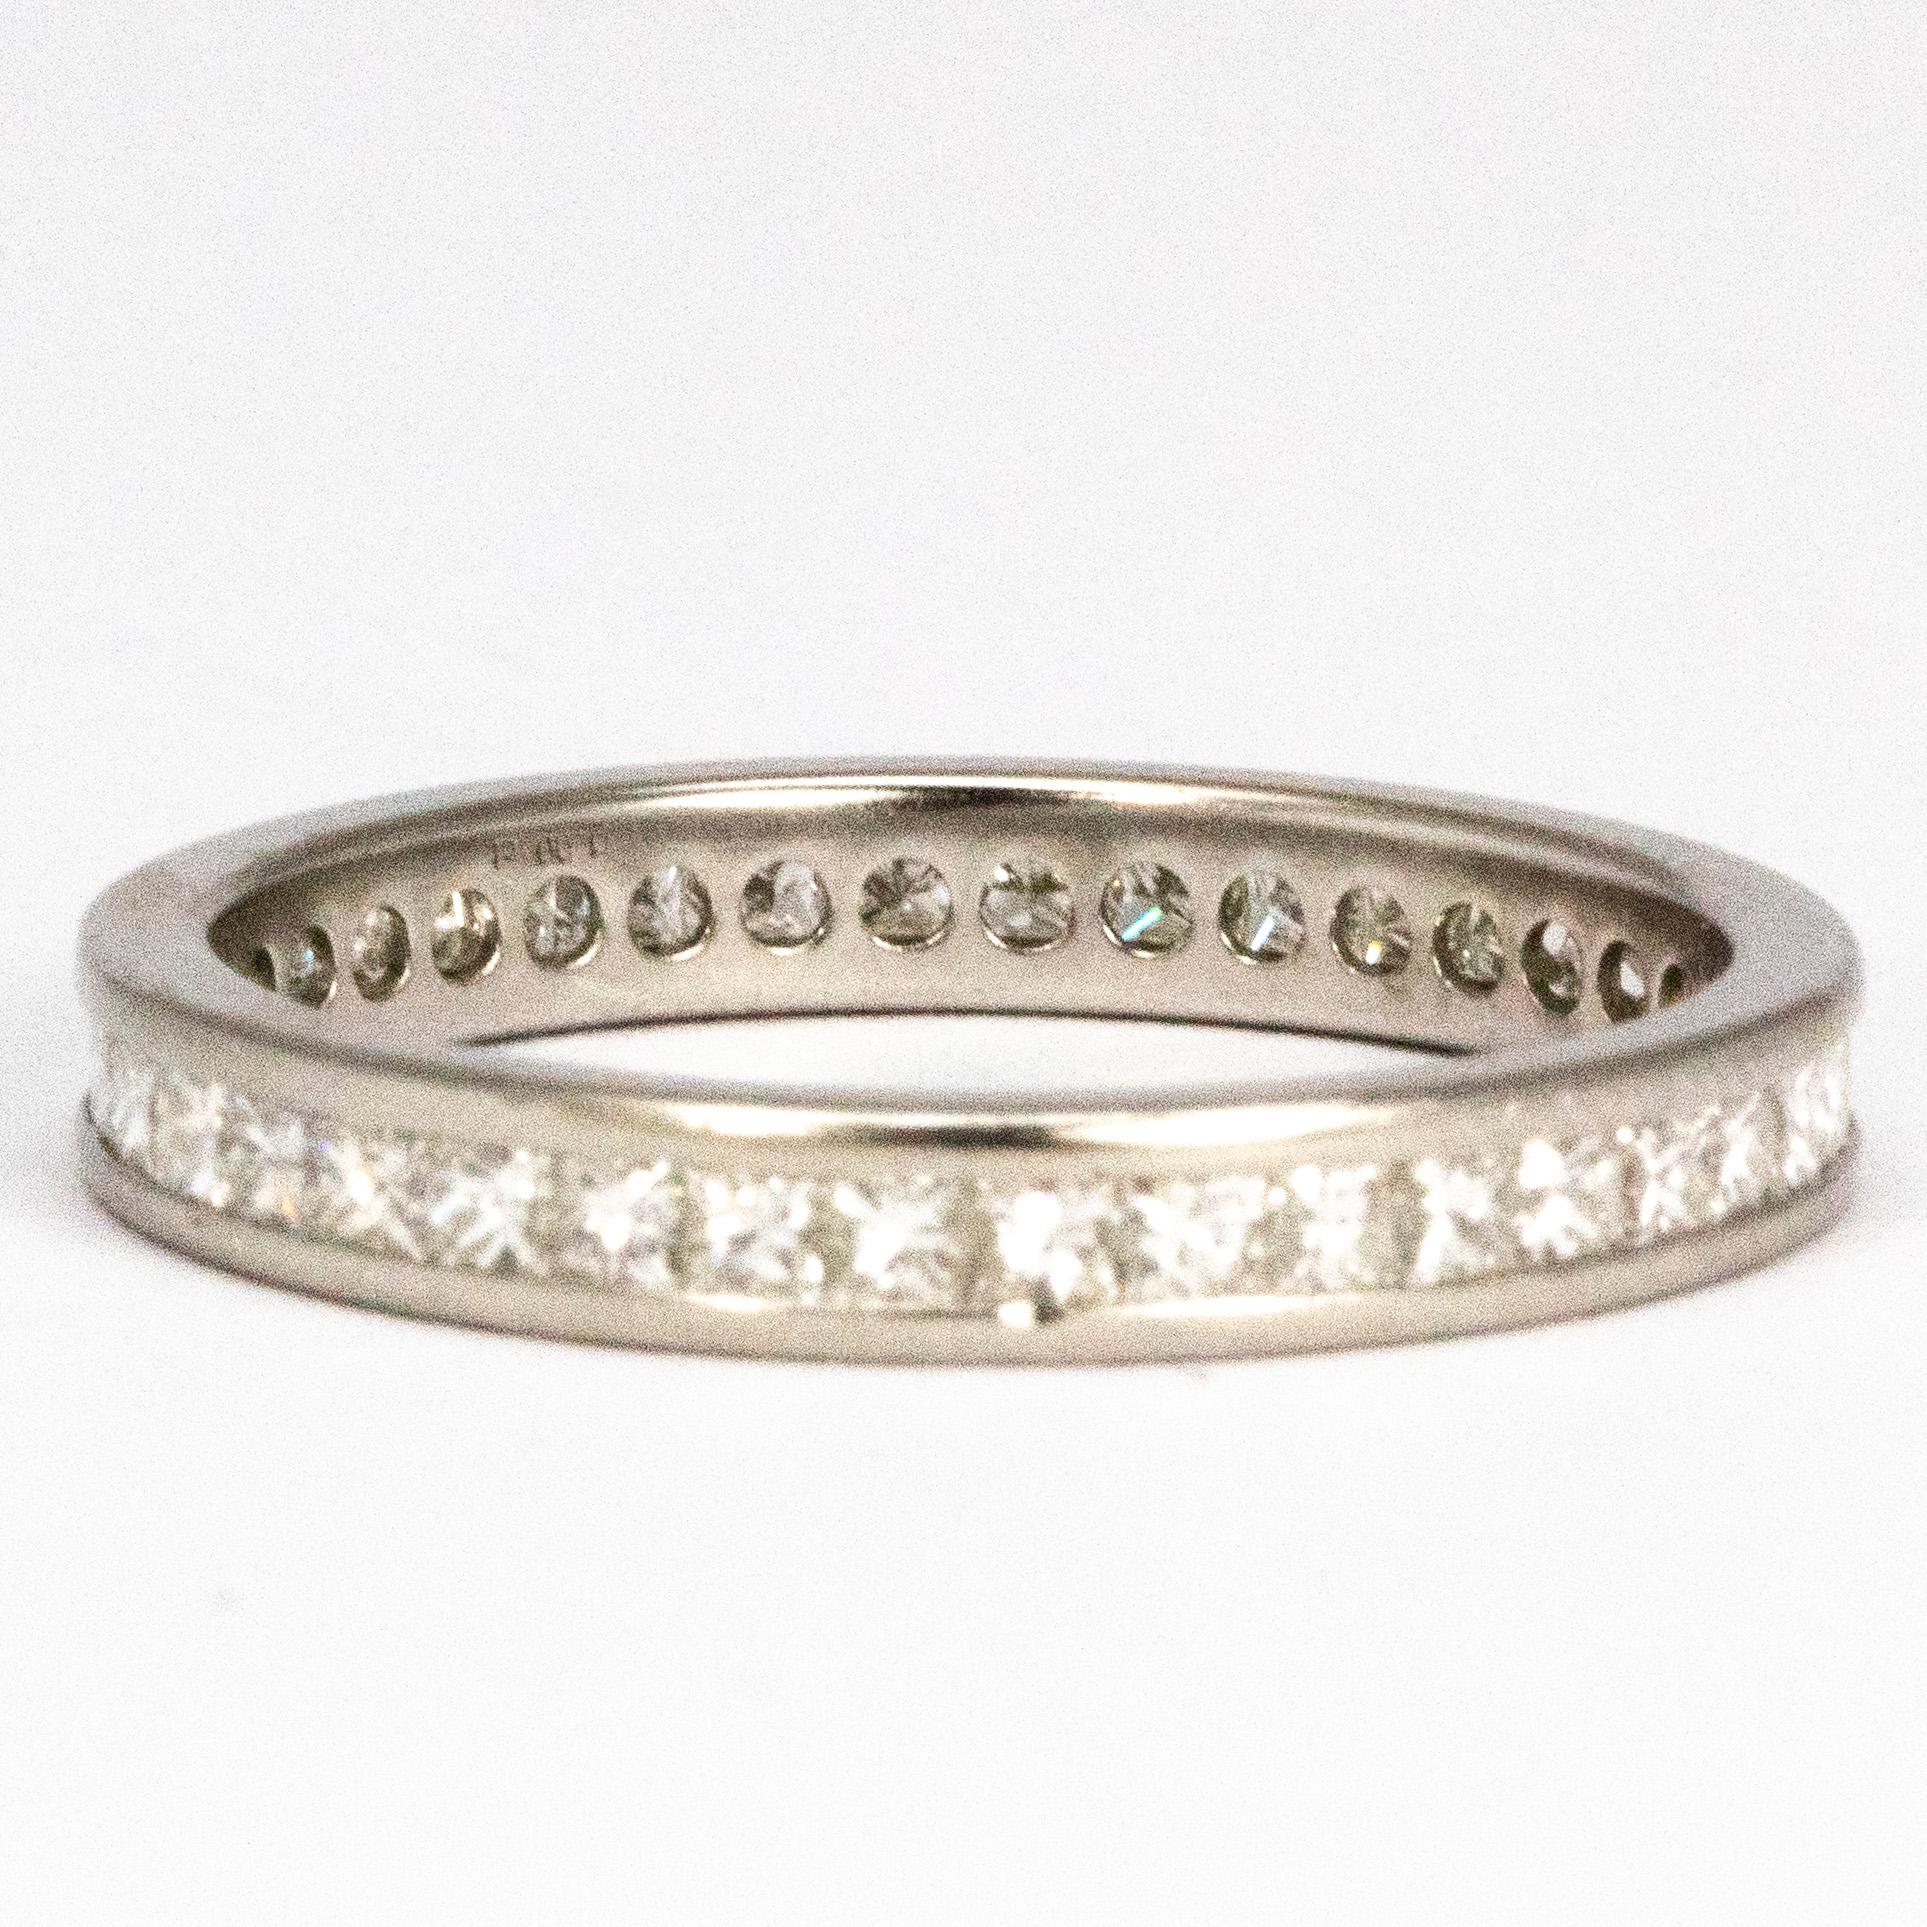 This full eternity band holds 5pt princess cut diamonds which carry on around the band. The stones sit flush in the band and this ring makes the perfect stack ring. 

Ring Size: P or 7 3/4 
Band Width: 2.7mm 